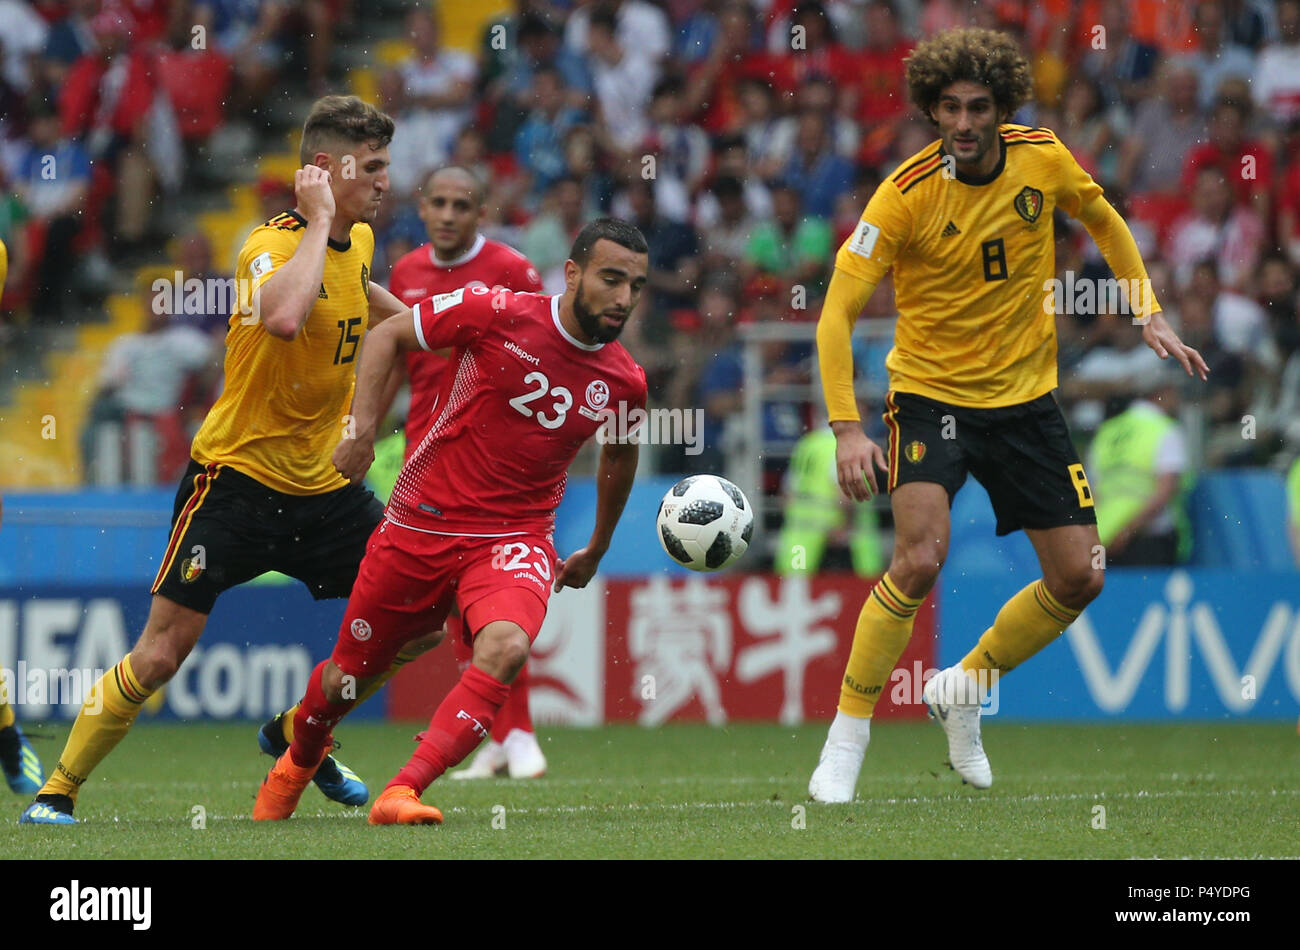 Moscow, Russia. 23rd June 2018. NAIM SLITI, Marouane Fellaini  in action during the Fifa World Cup Russia 2018, Group C, football match between BELGIUM V TUNISIA  in SPARTAK STADIUM in Moscow Stadium Credit: marco iacobucci/Alamy Live News Stock Photo